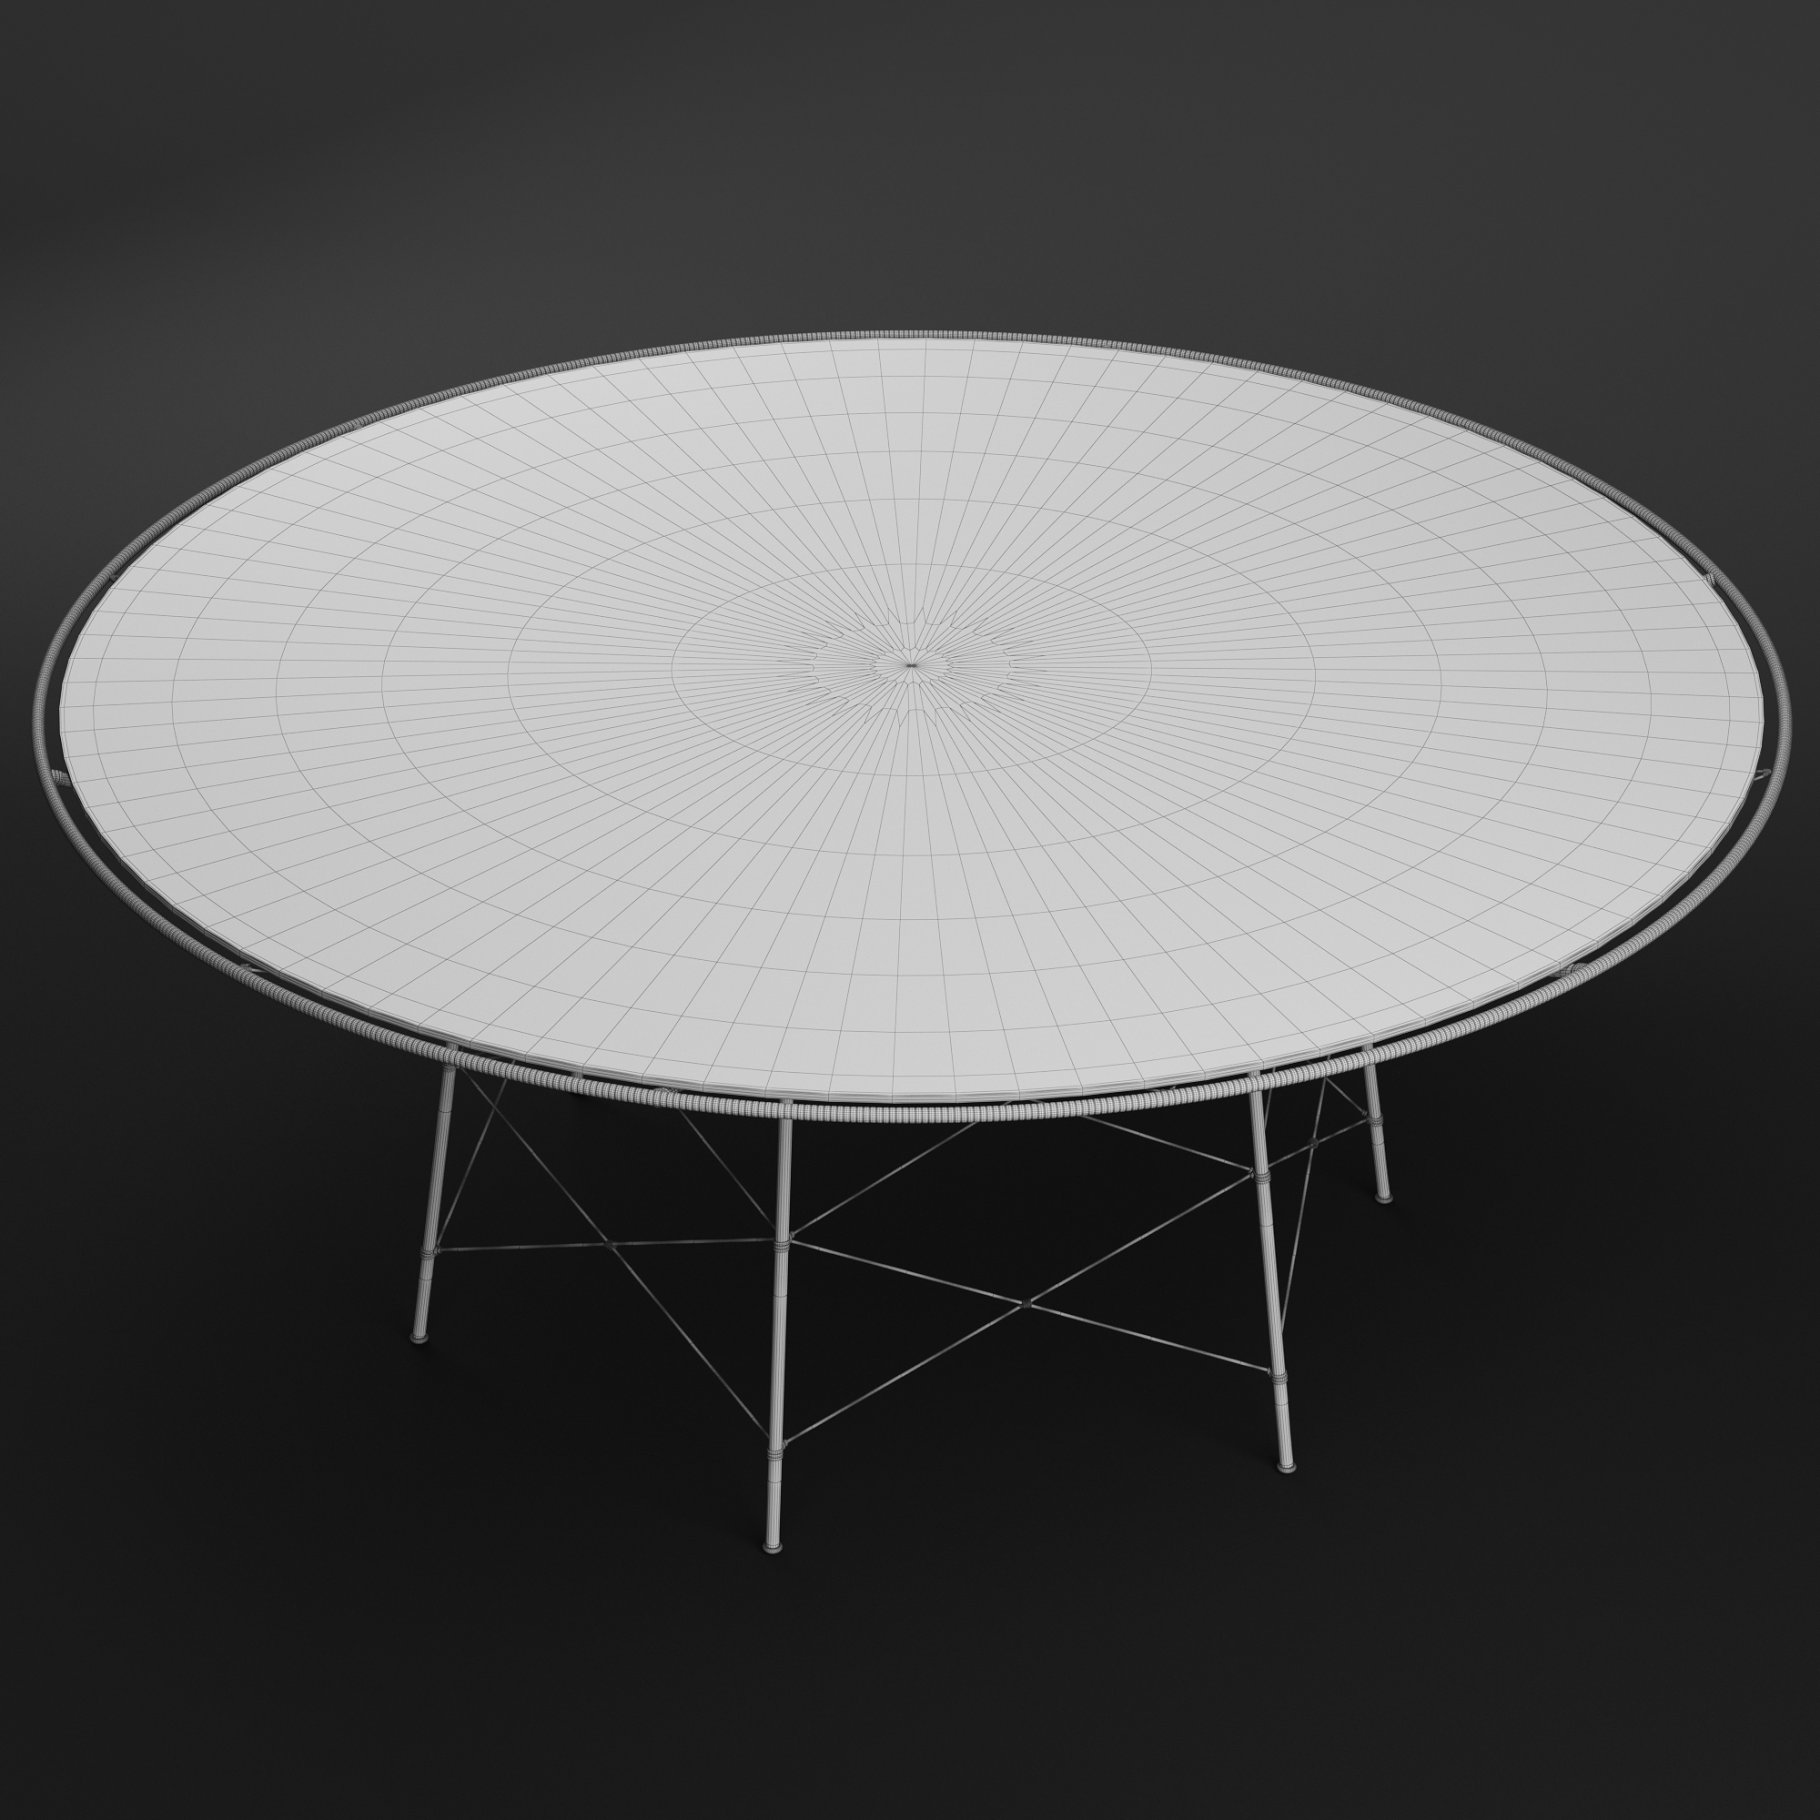 Whisk glass top dining table round.